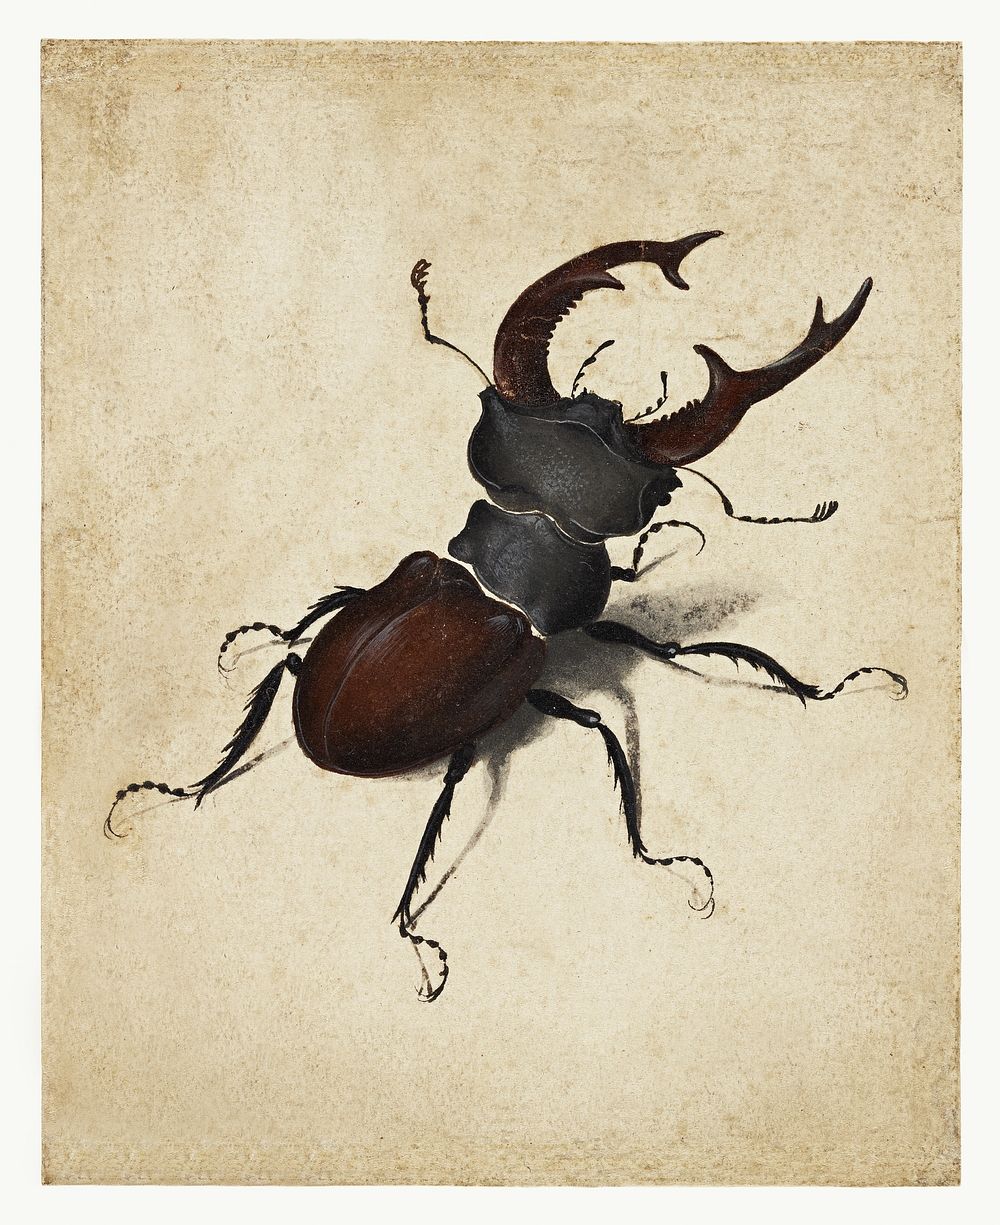 Albrecht D&uuml;rer's Stag Beetle (1505). Original public domain image from Getty Museum. Digitally enhanced by rawpixel.